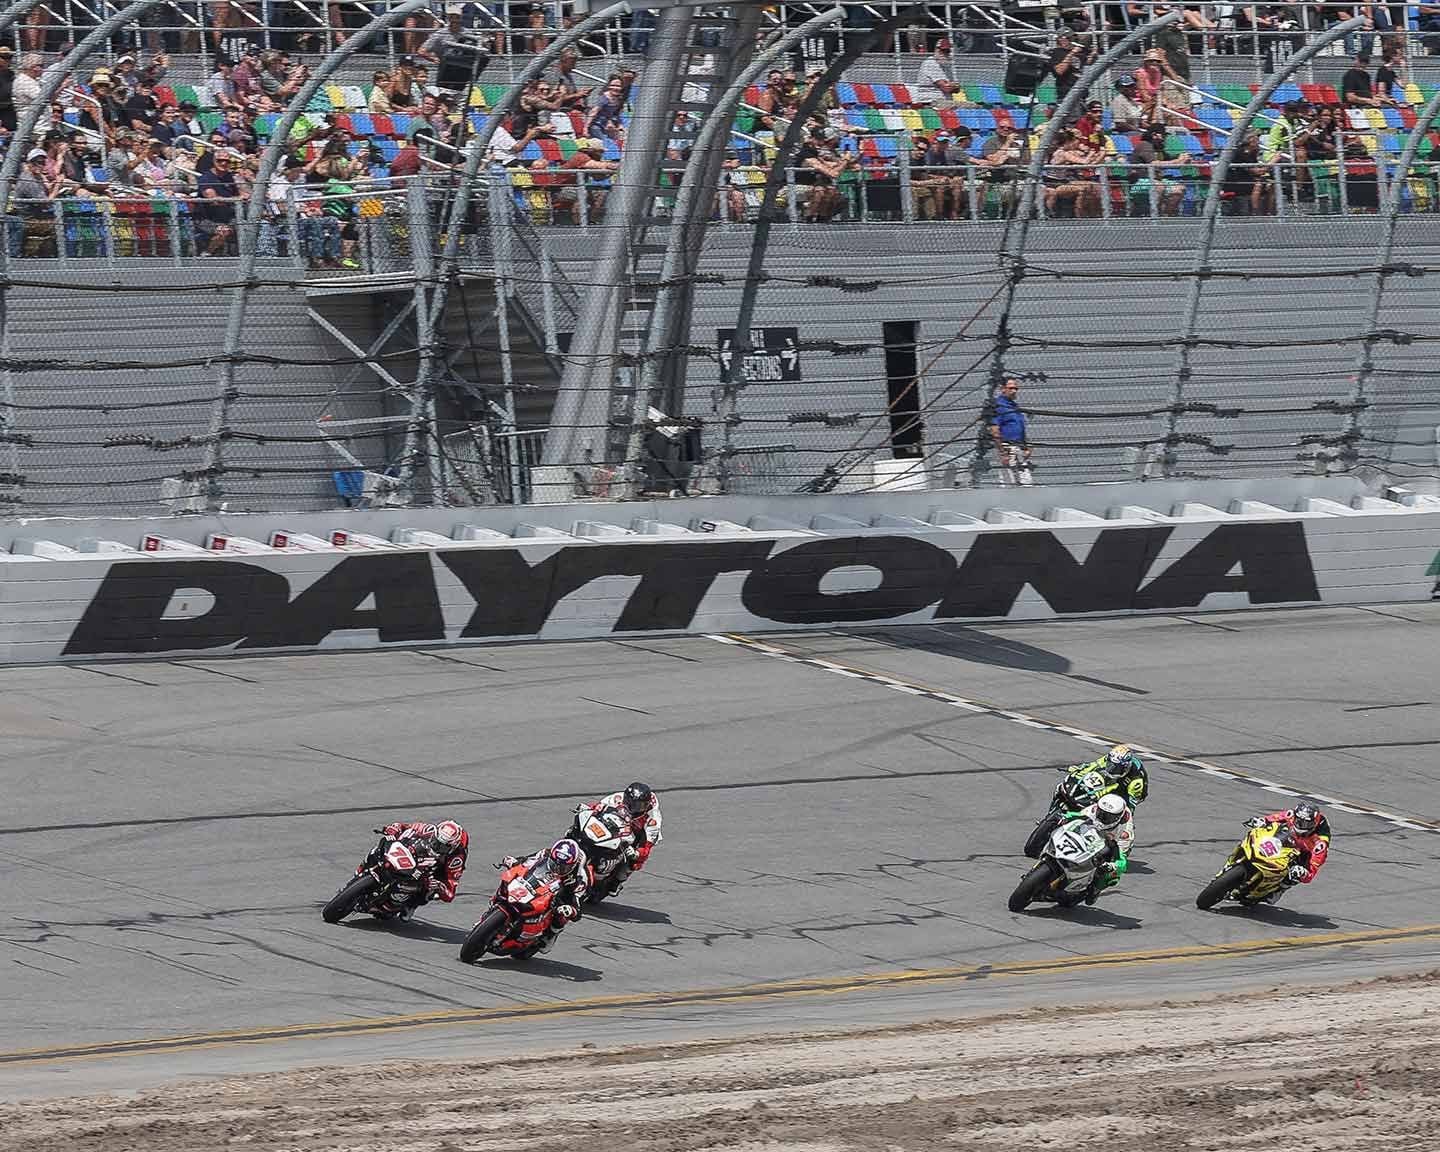 Fuel calculations are key to success at Daytona.